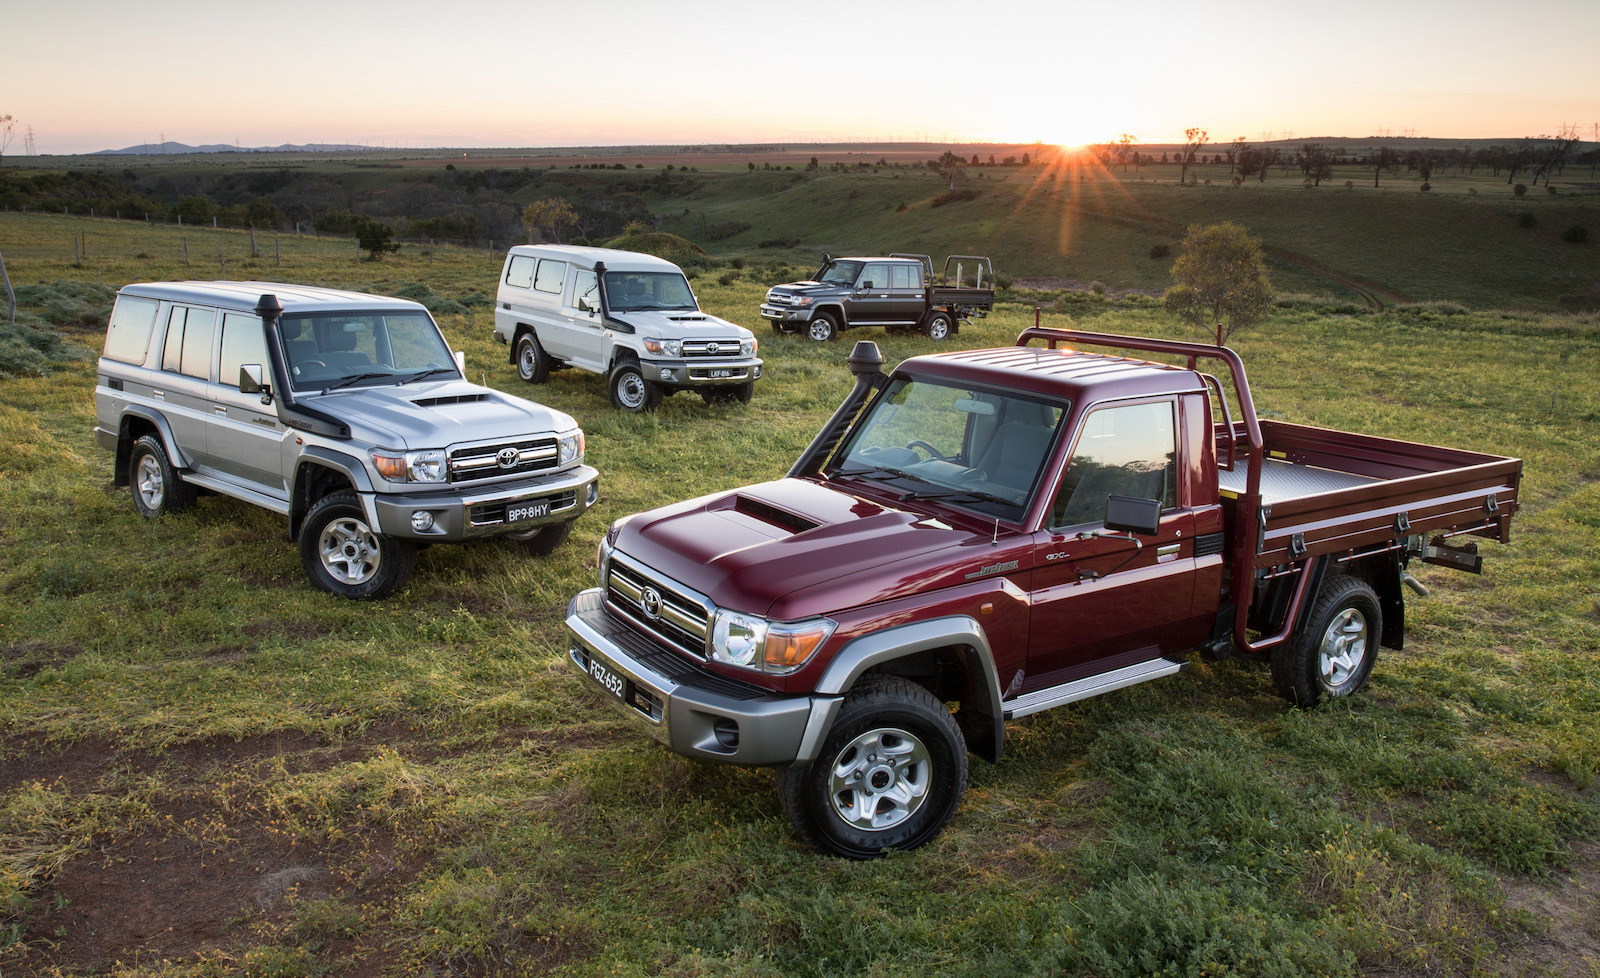 Toyota LandCruiser 70 Series updated for 2020, adds touchscreen